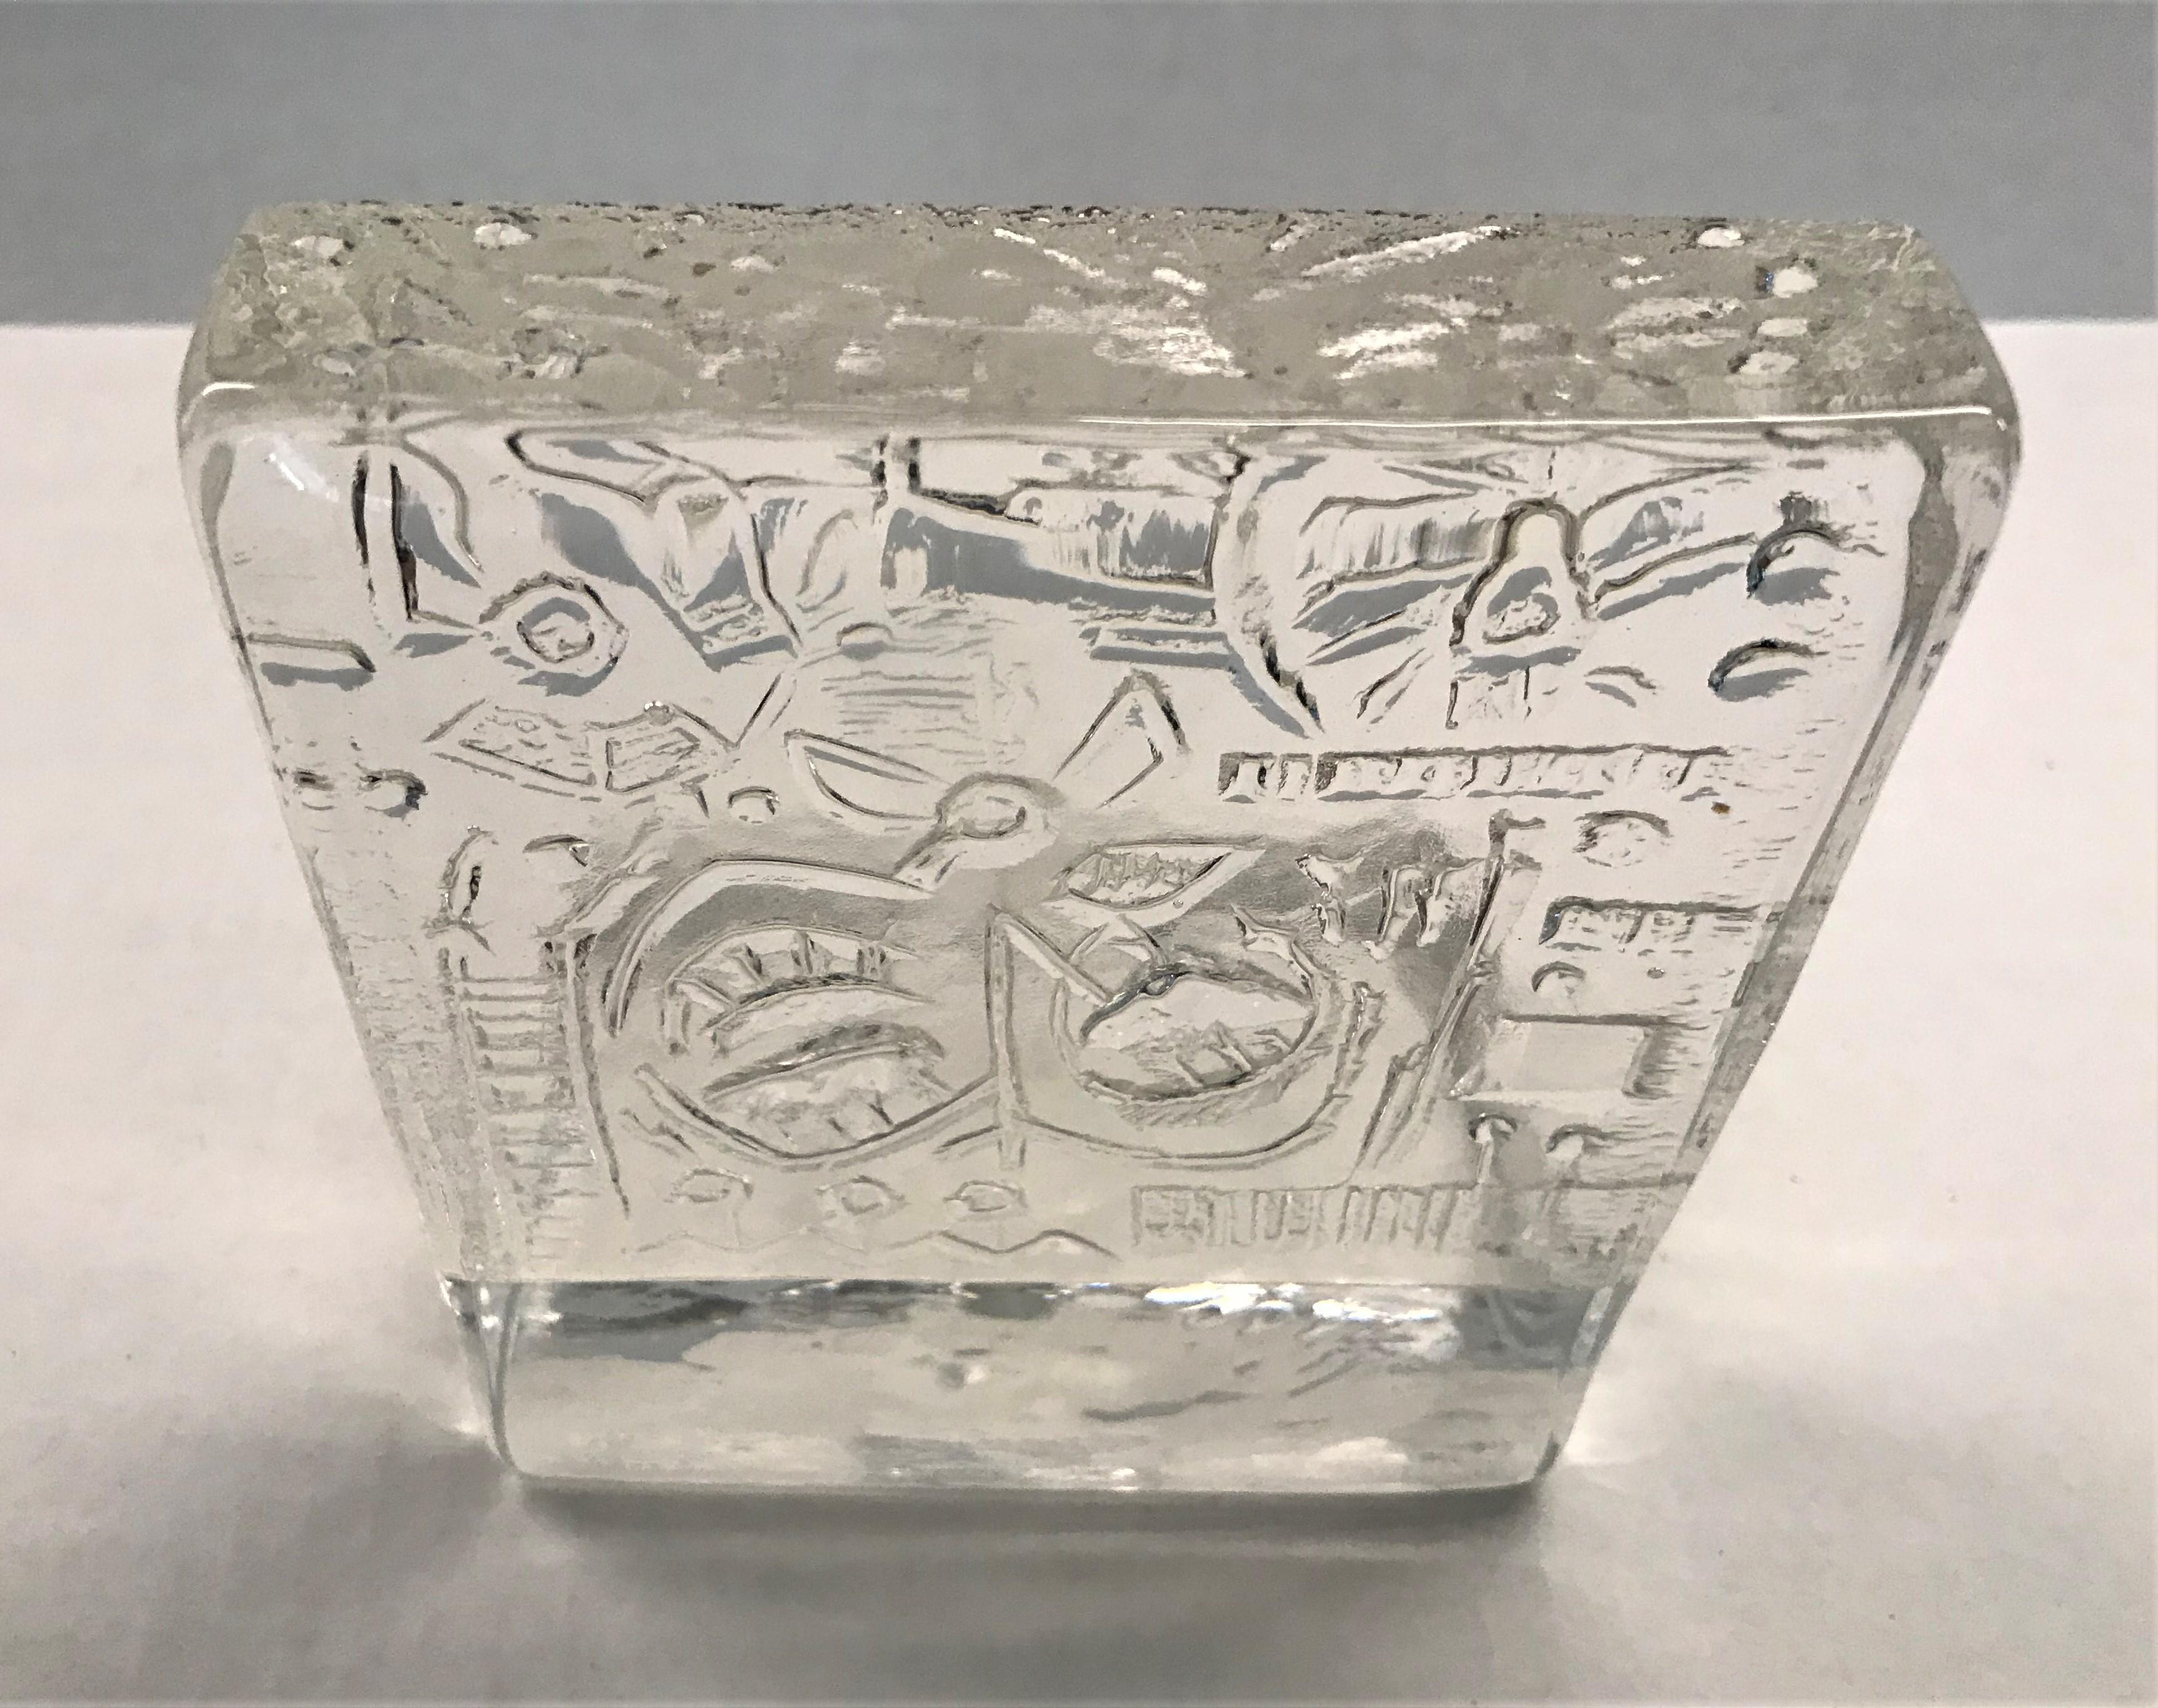 Here a 1970s glass screen tea candleholder by Uno Westerberg for Pukeberg, Sweden. The 1 1/8 inch thick glass front panel with a background in relief of stylized modern flower design while the front is smooth. Lovely effect when the tea candle is